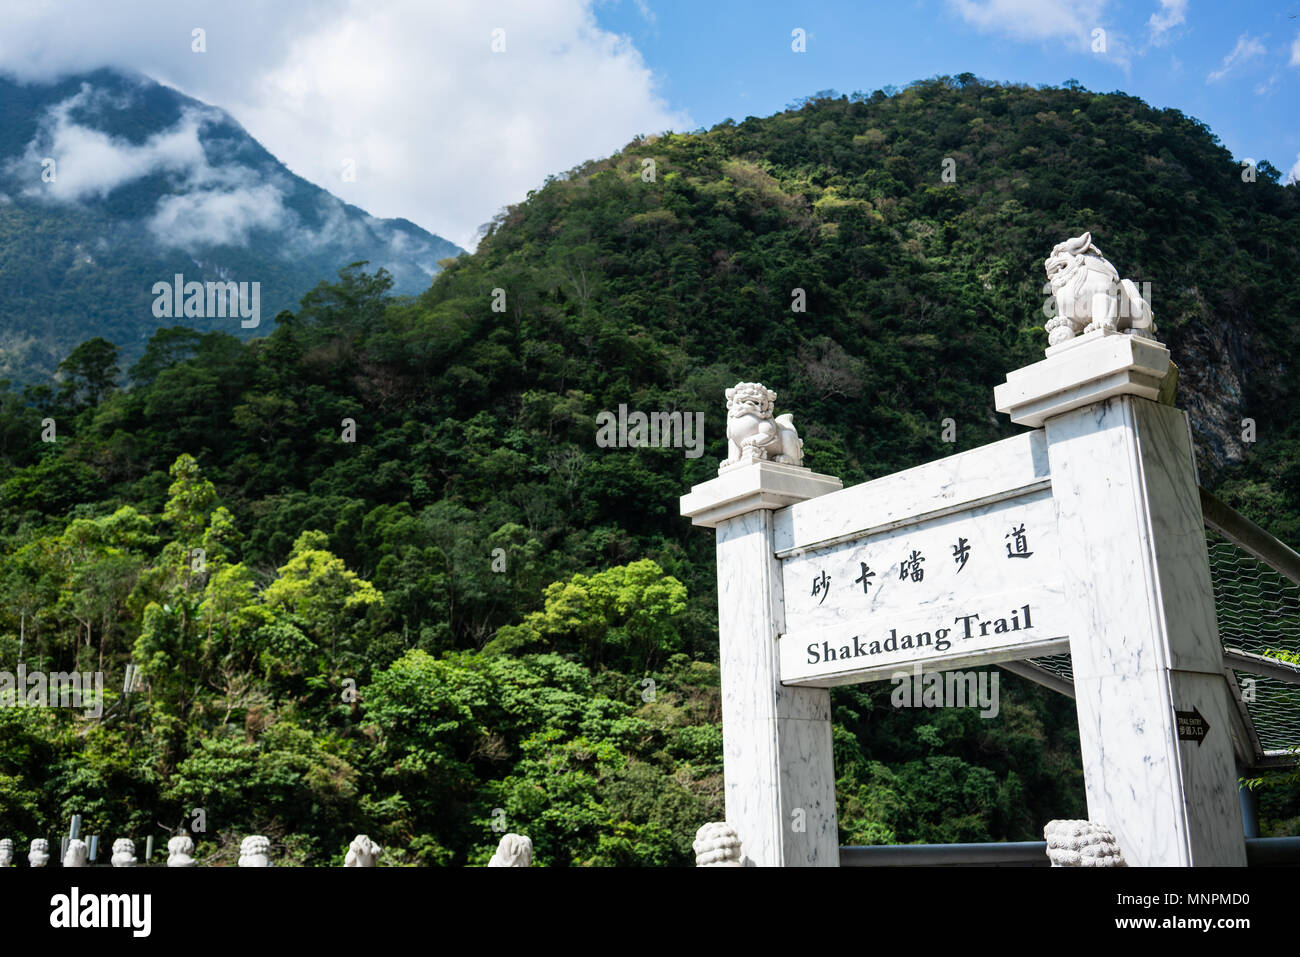 Shakadang trail entrace gate and mountain view in taroko gorge national park in Hualien Taiwan Stock Photo